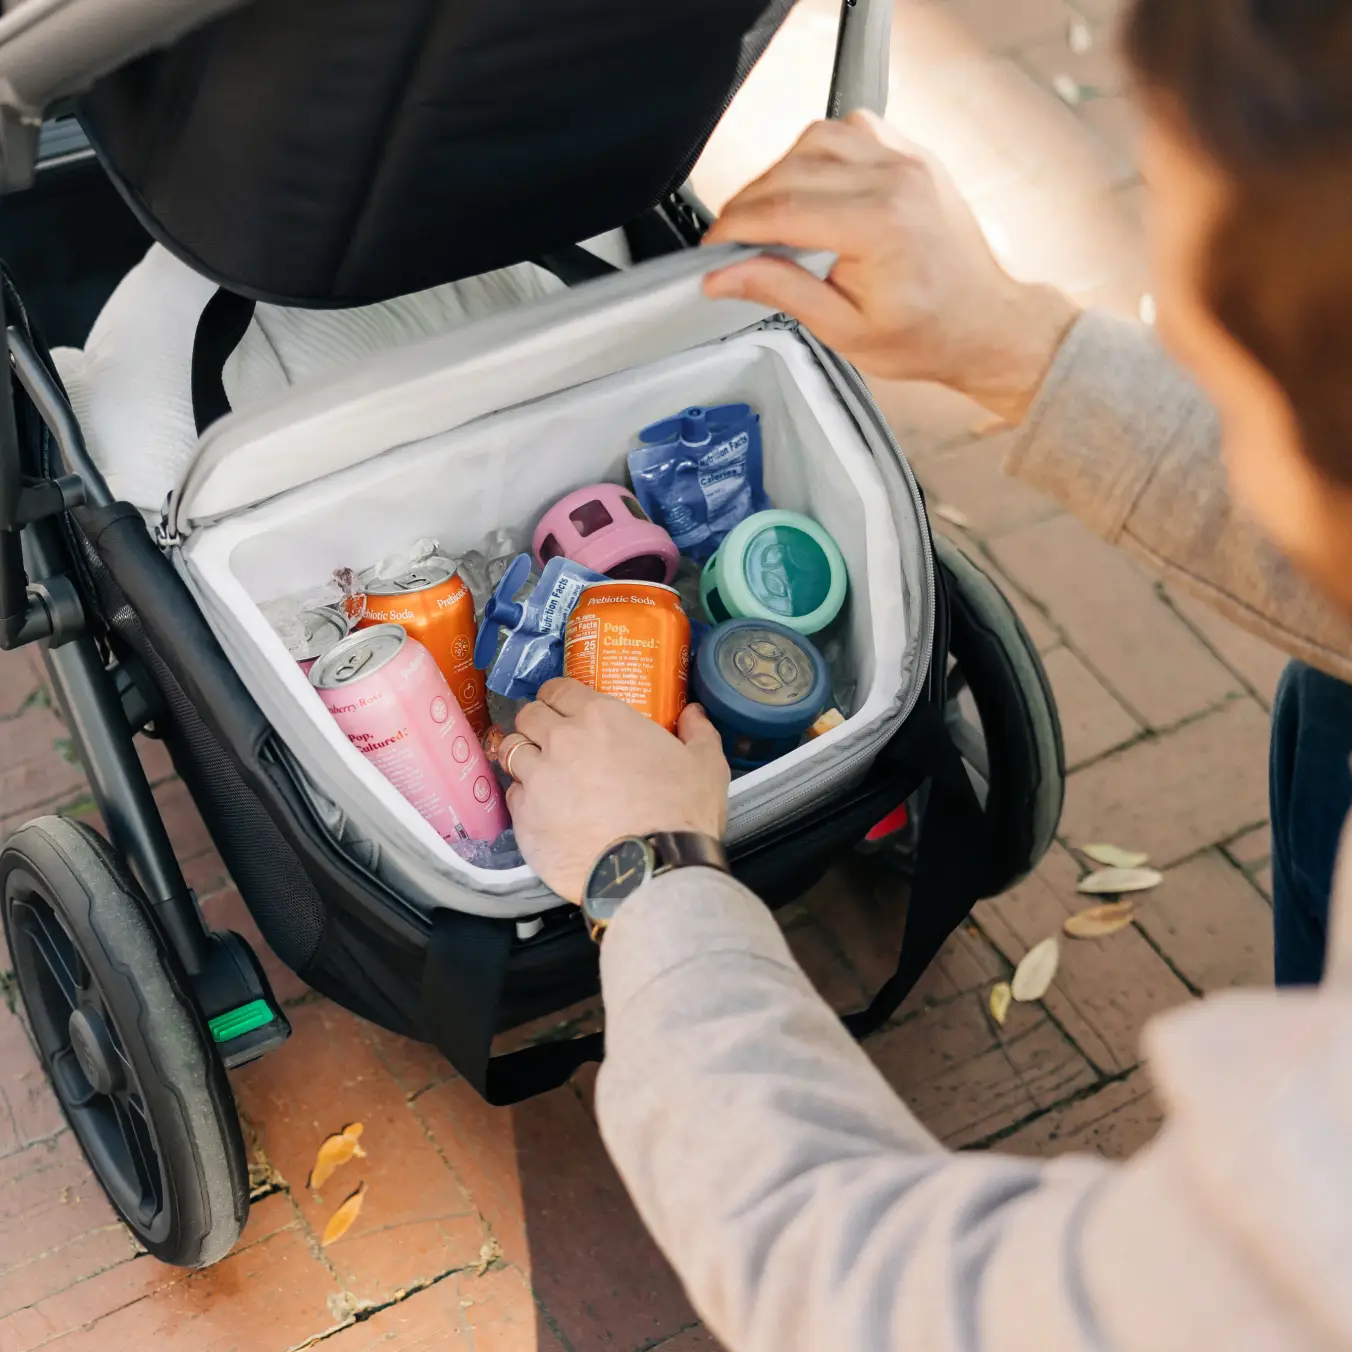 uppababy vista twin travel system